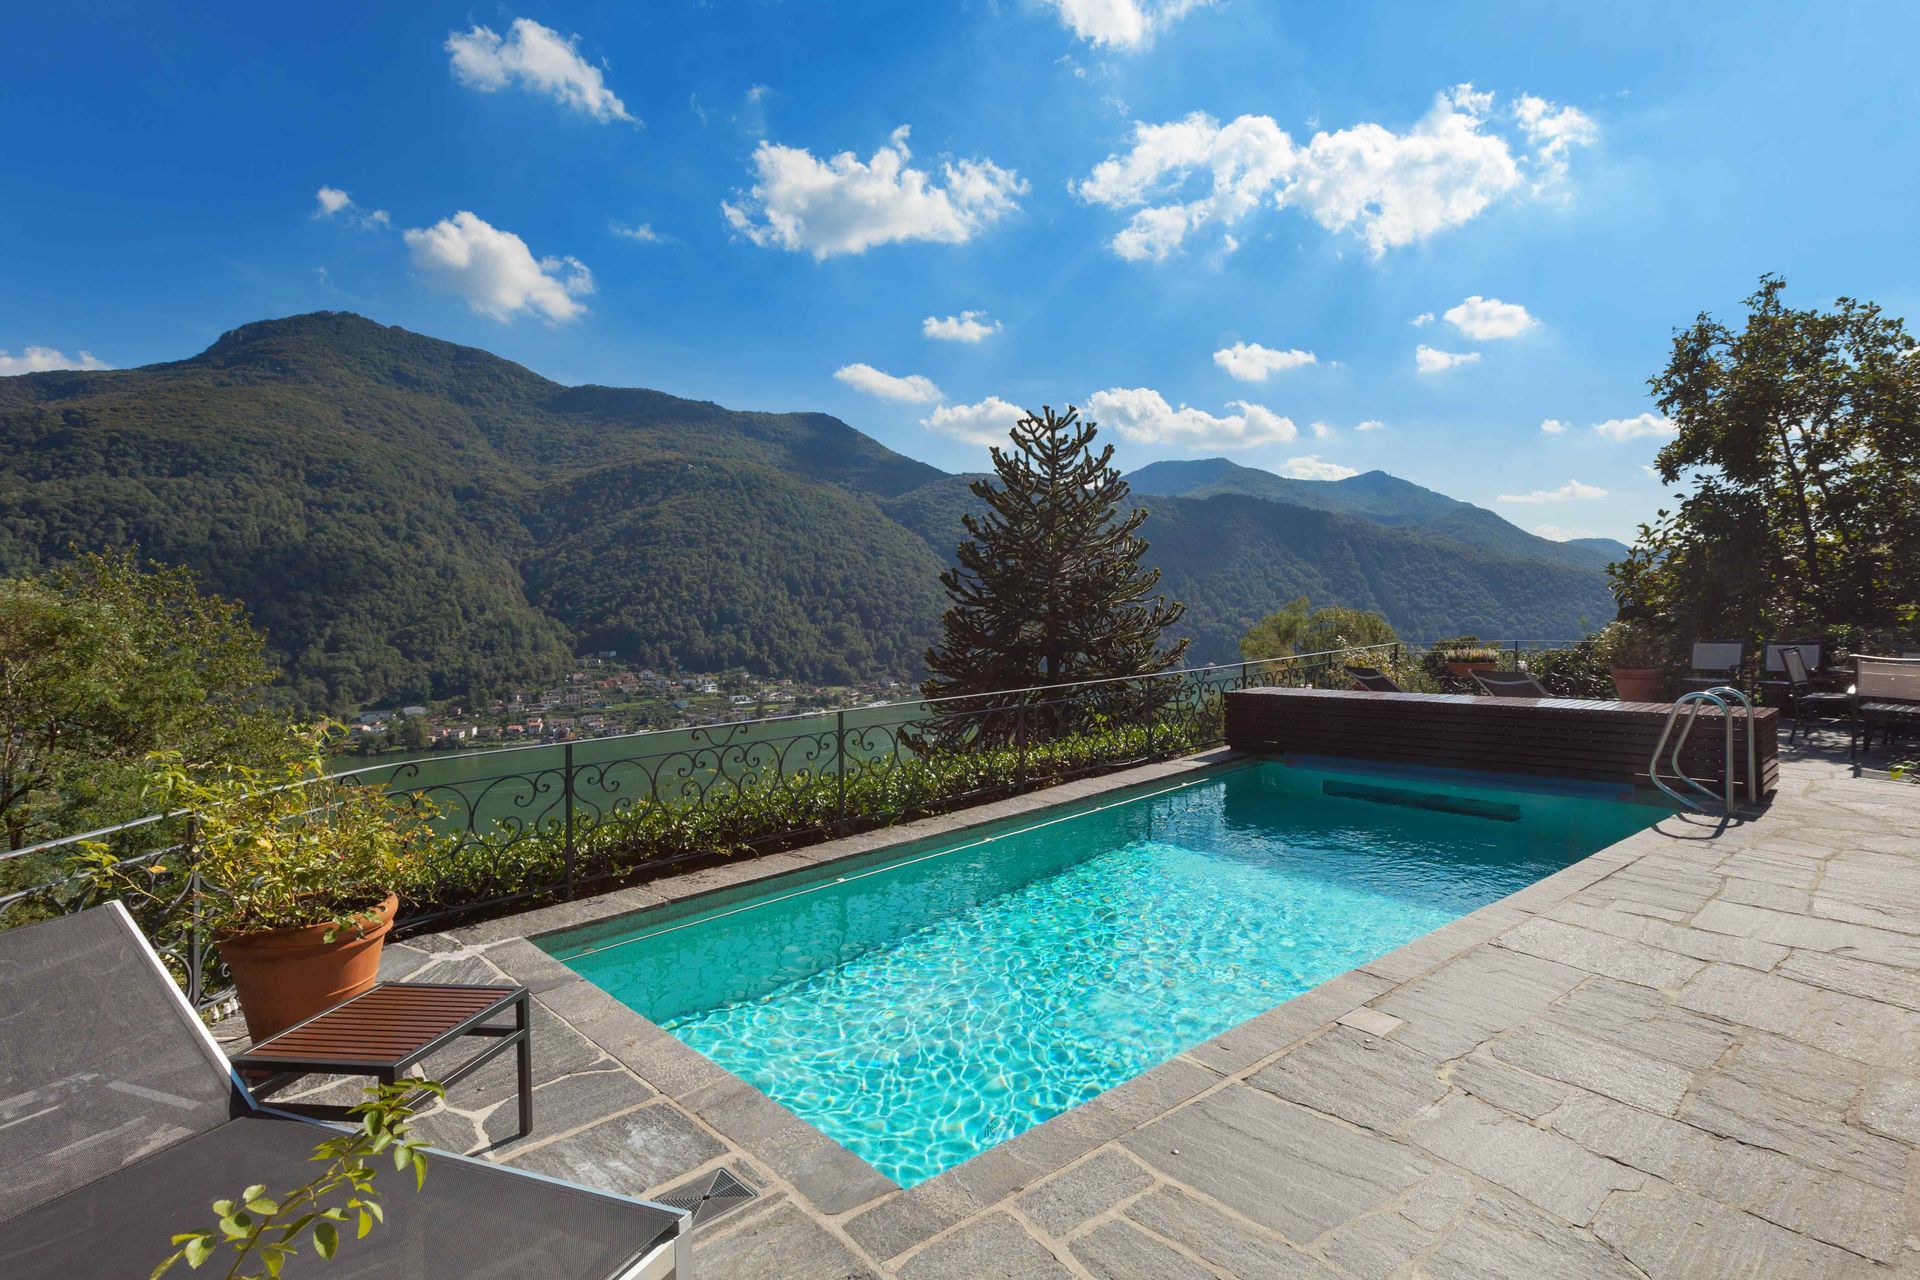 Pool in the mountains pictured